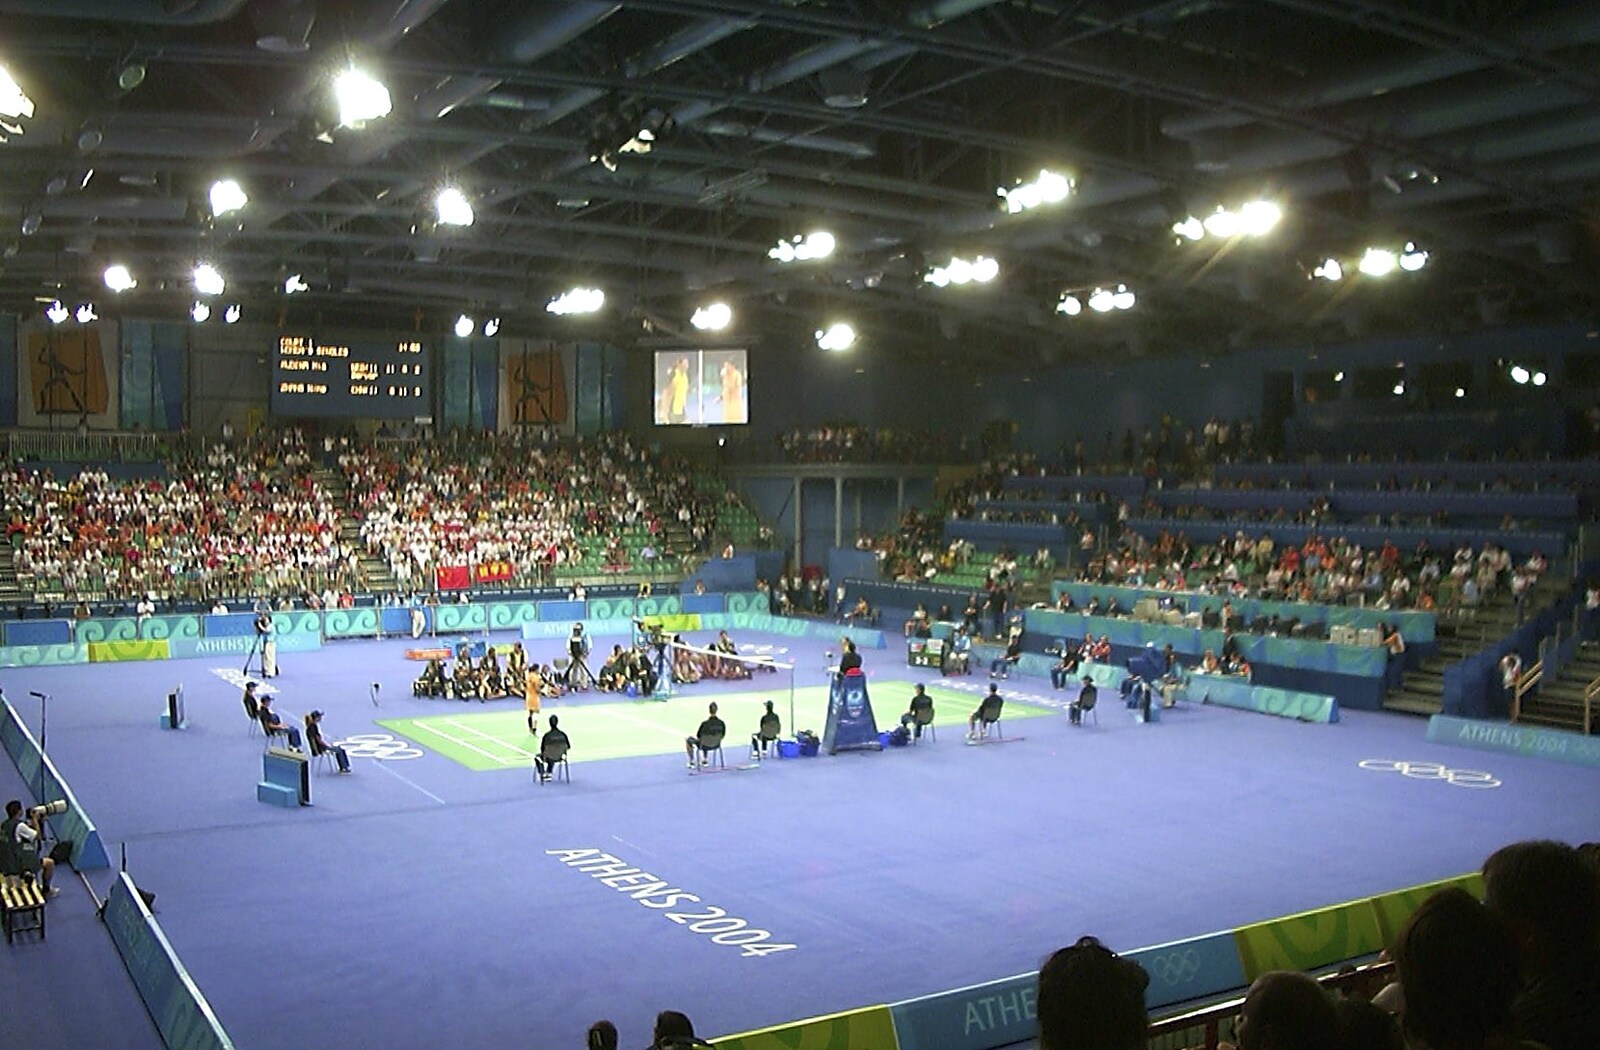 A Postcard From Athens: A Day Trip to the Olympics, Greece - 19th August 2004: It's the badminton finals